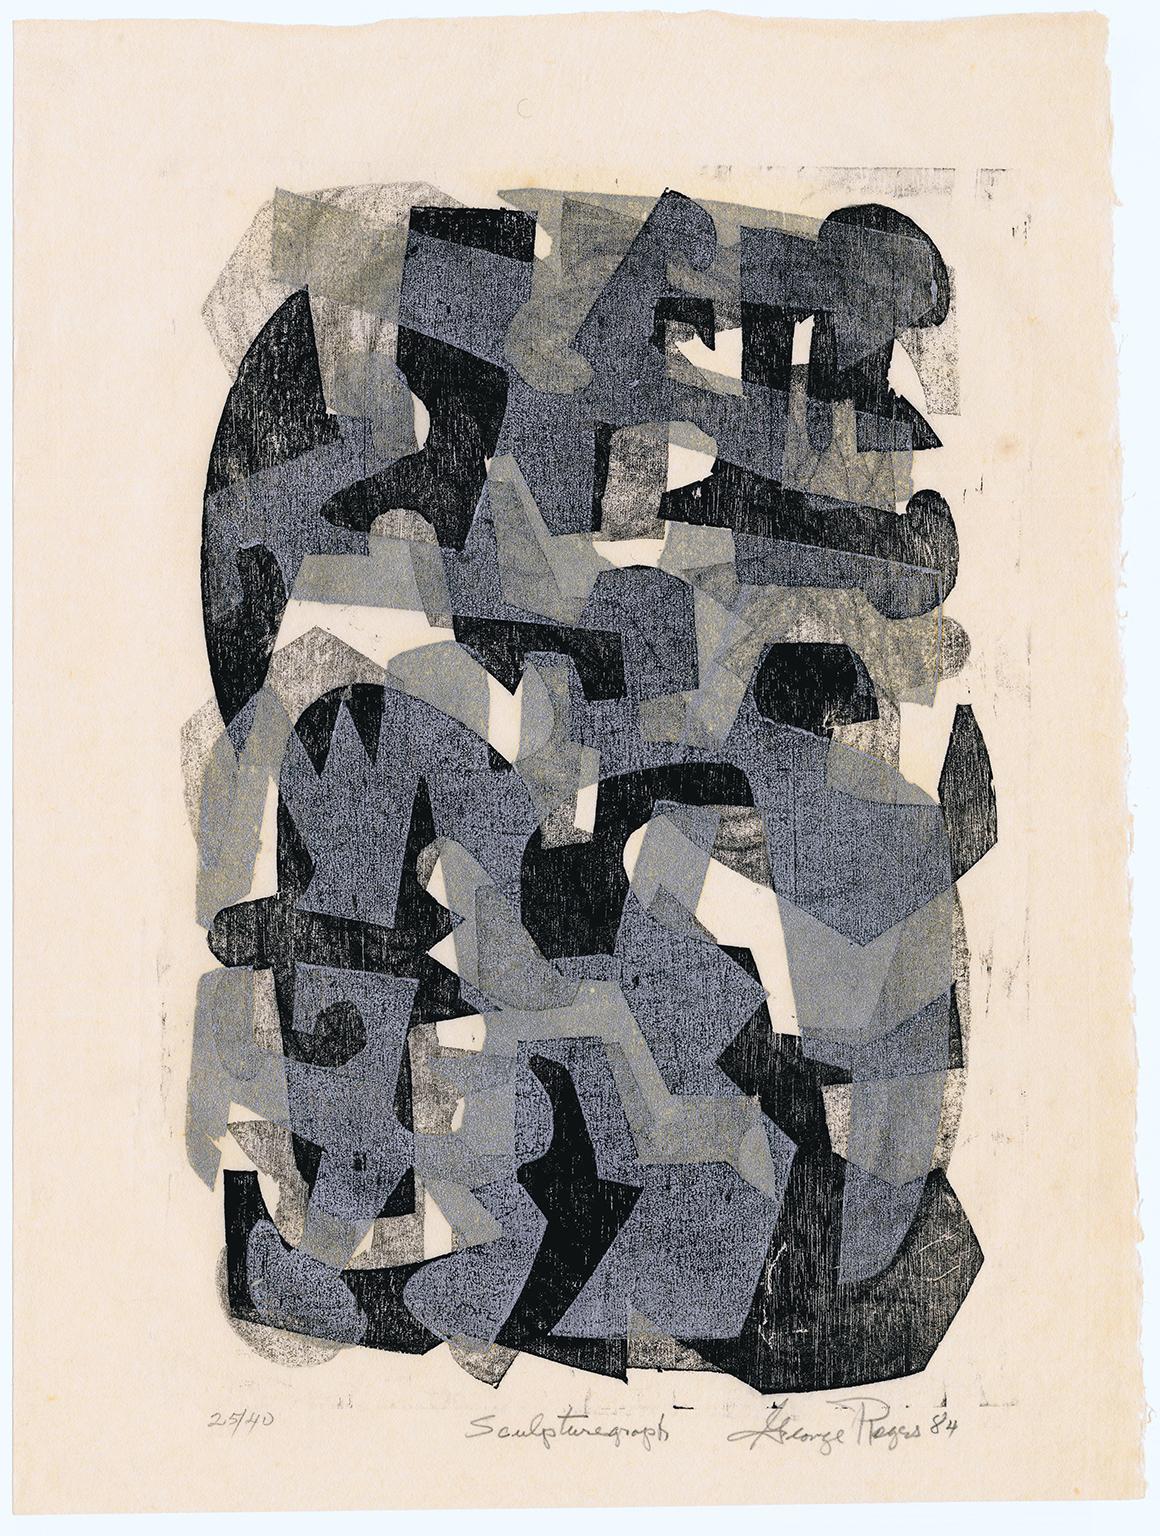 'Sculpturegraph' — Modernist Abstraction, Contemporary African American Artist - Print by George Rogers